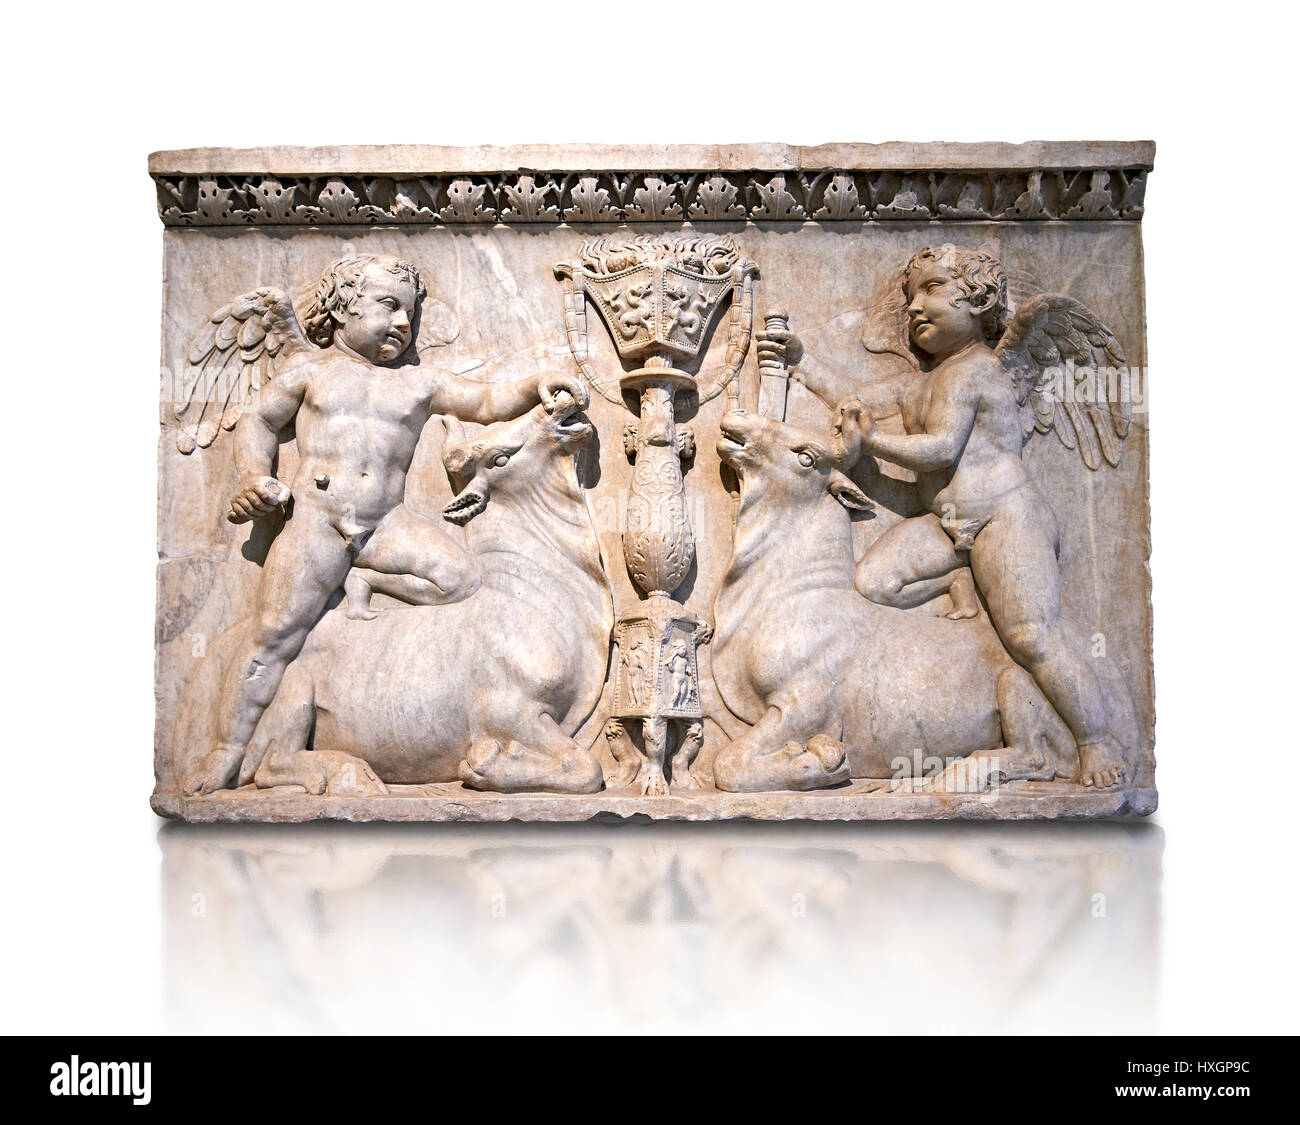 Roman sculptured relief with cupids sacrificing bulls,Temple of Venus Genetrix Rome 30 AD , inv 6718, Naples National Museum of Archaeology, Italy, Stock Photo